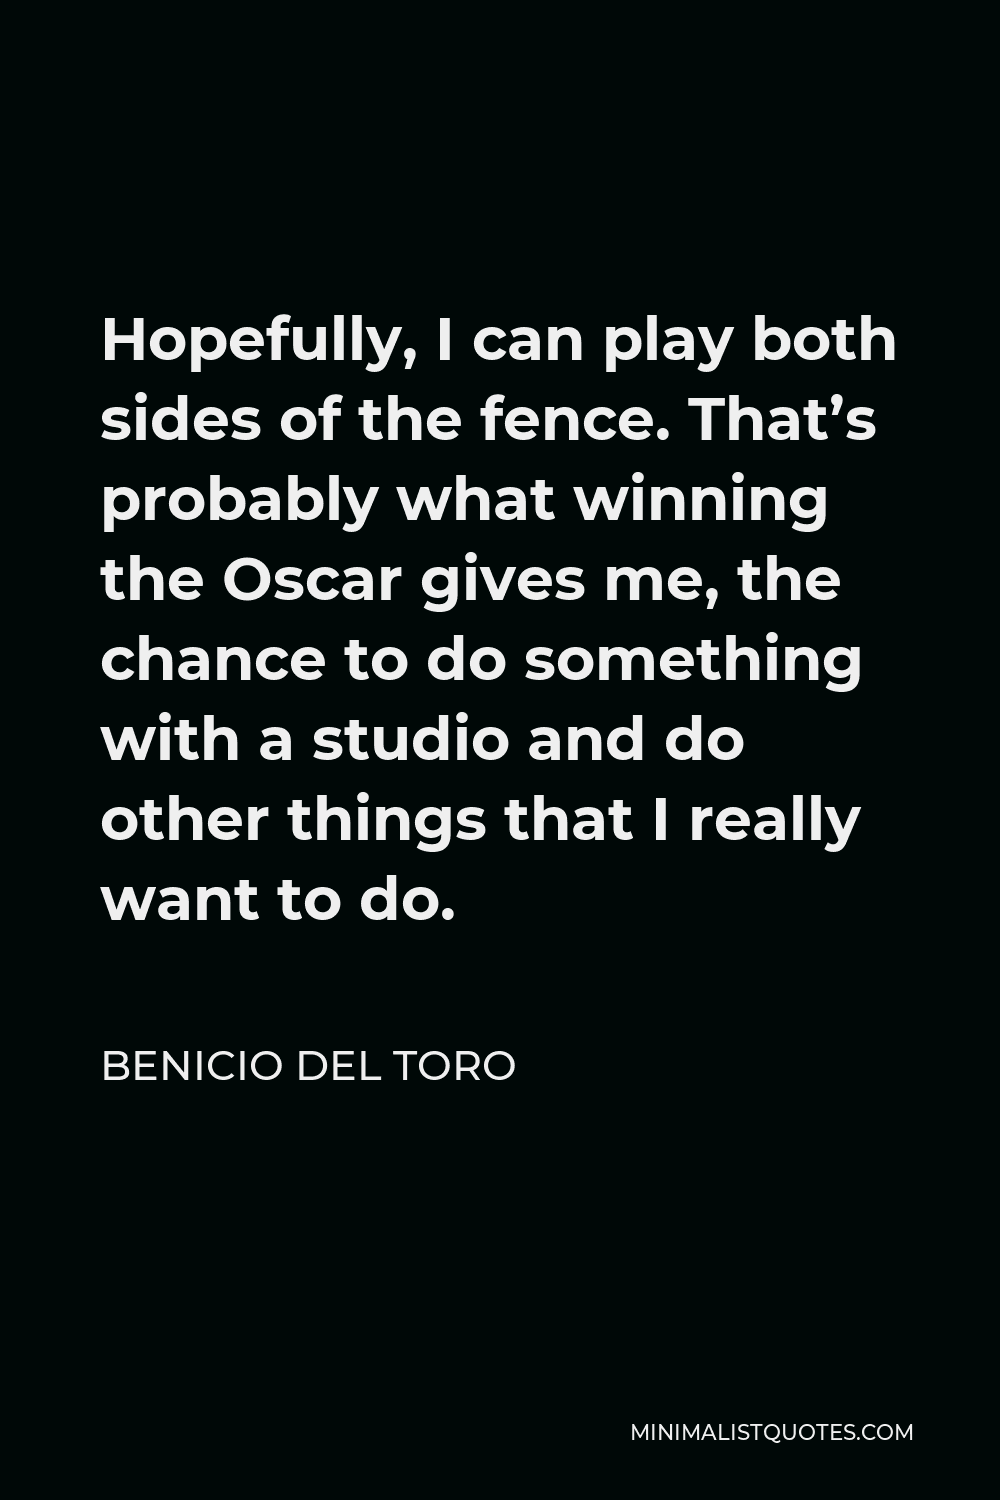 Benicio Del Toro Quote - Hopefully, I can play both sides of the fence. That’s probably what winning the Oscar gives me, the chance to do something with a studio and do other things that I really want to do.